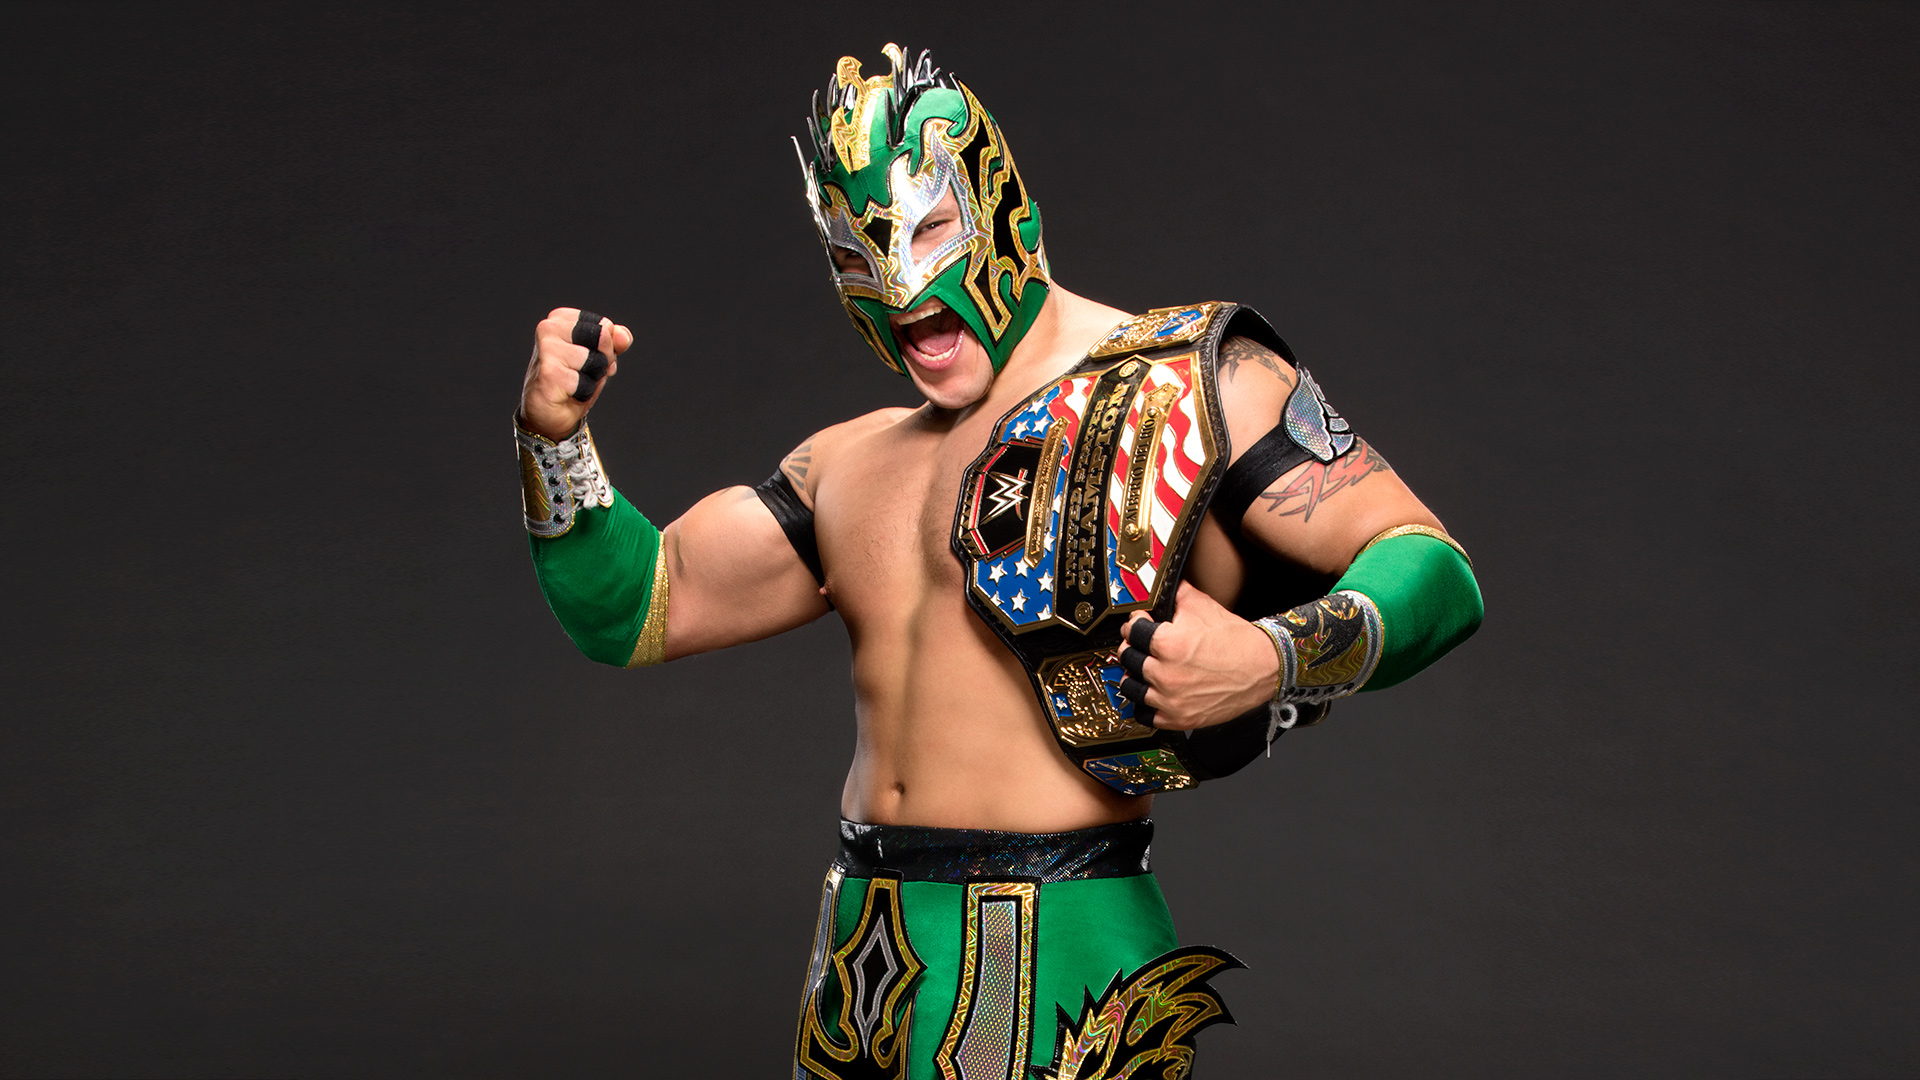 Wwe Kalisto HD Wallpaper Amp Pictures Live